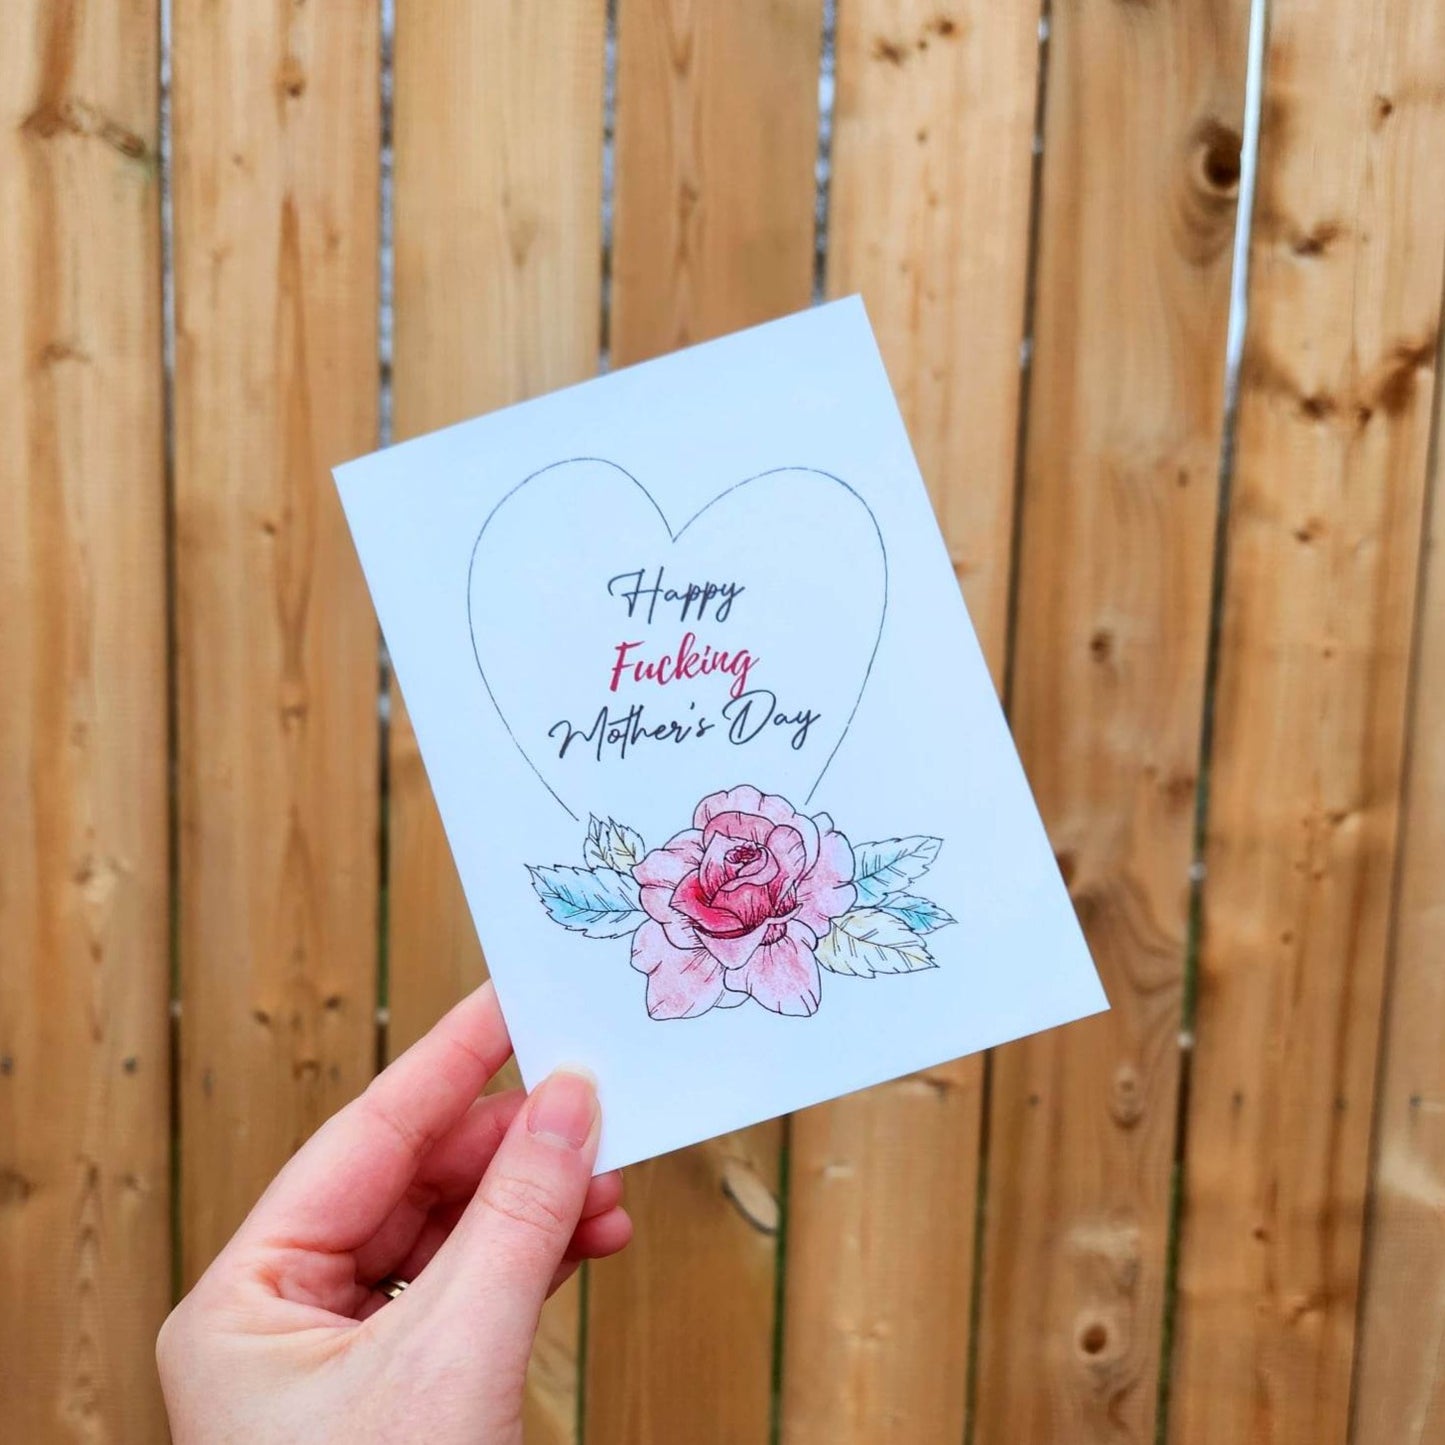 Happy fucking mother's day, Mother's day card, Sweary card, Cute cuss card for mom, Funny Mother's day card for wife, Card for bestie mom